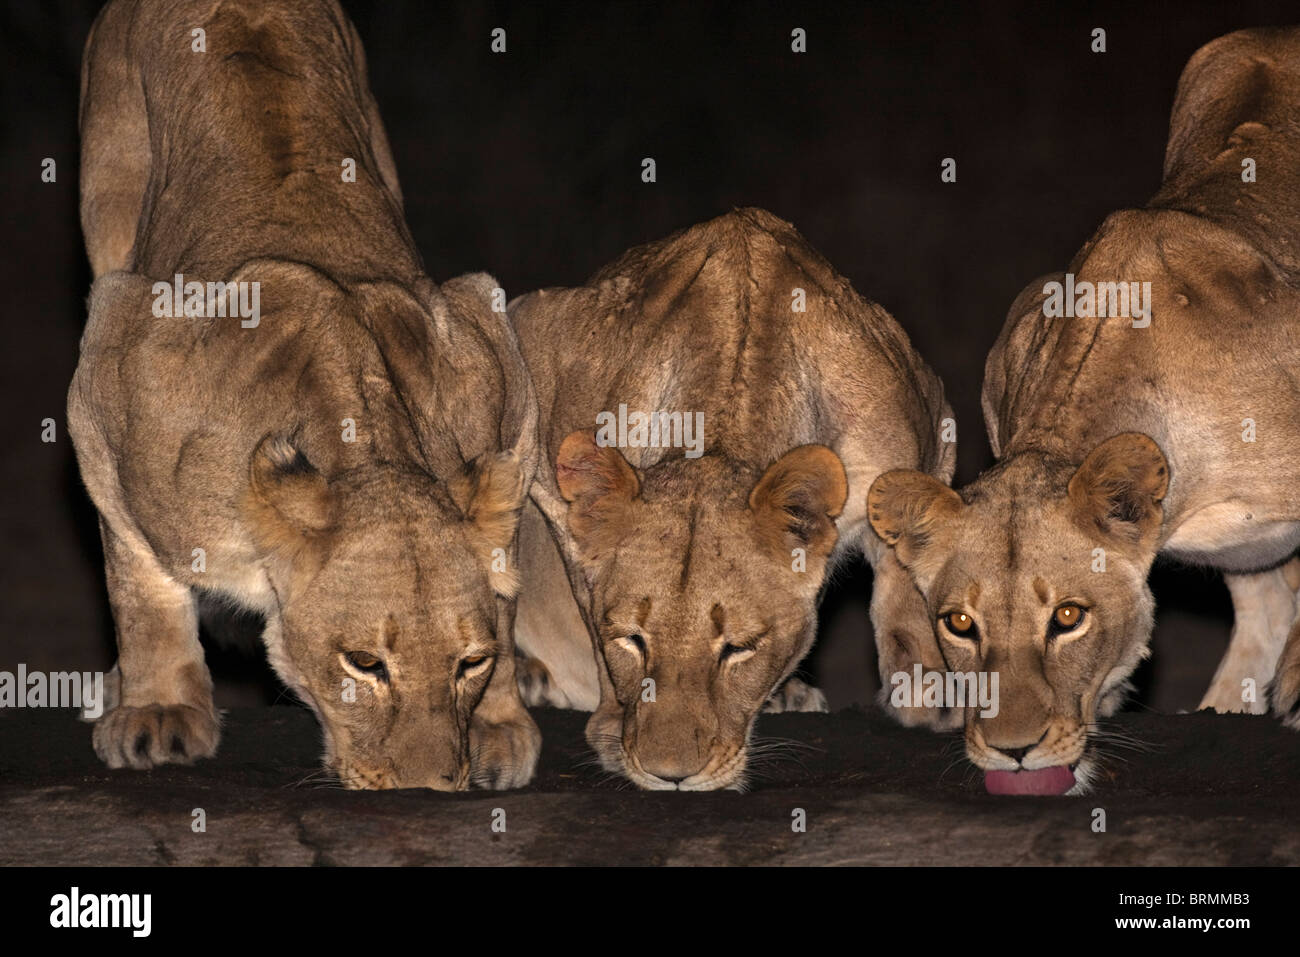 Three female lions drinking side-by side at night Stock Photo